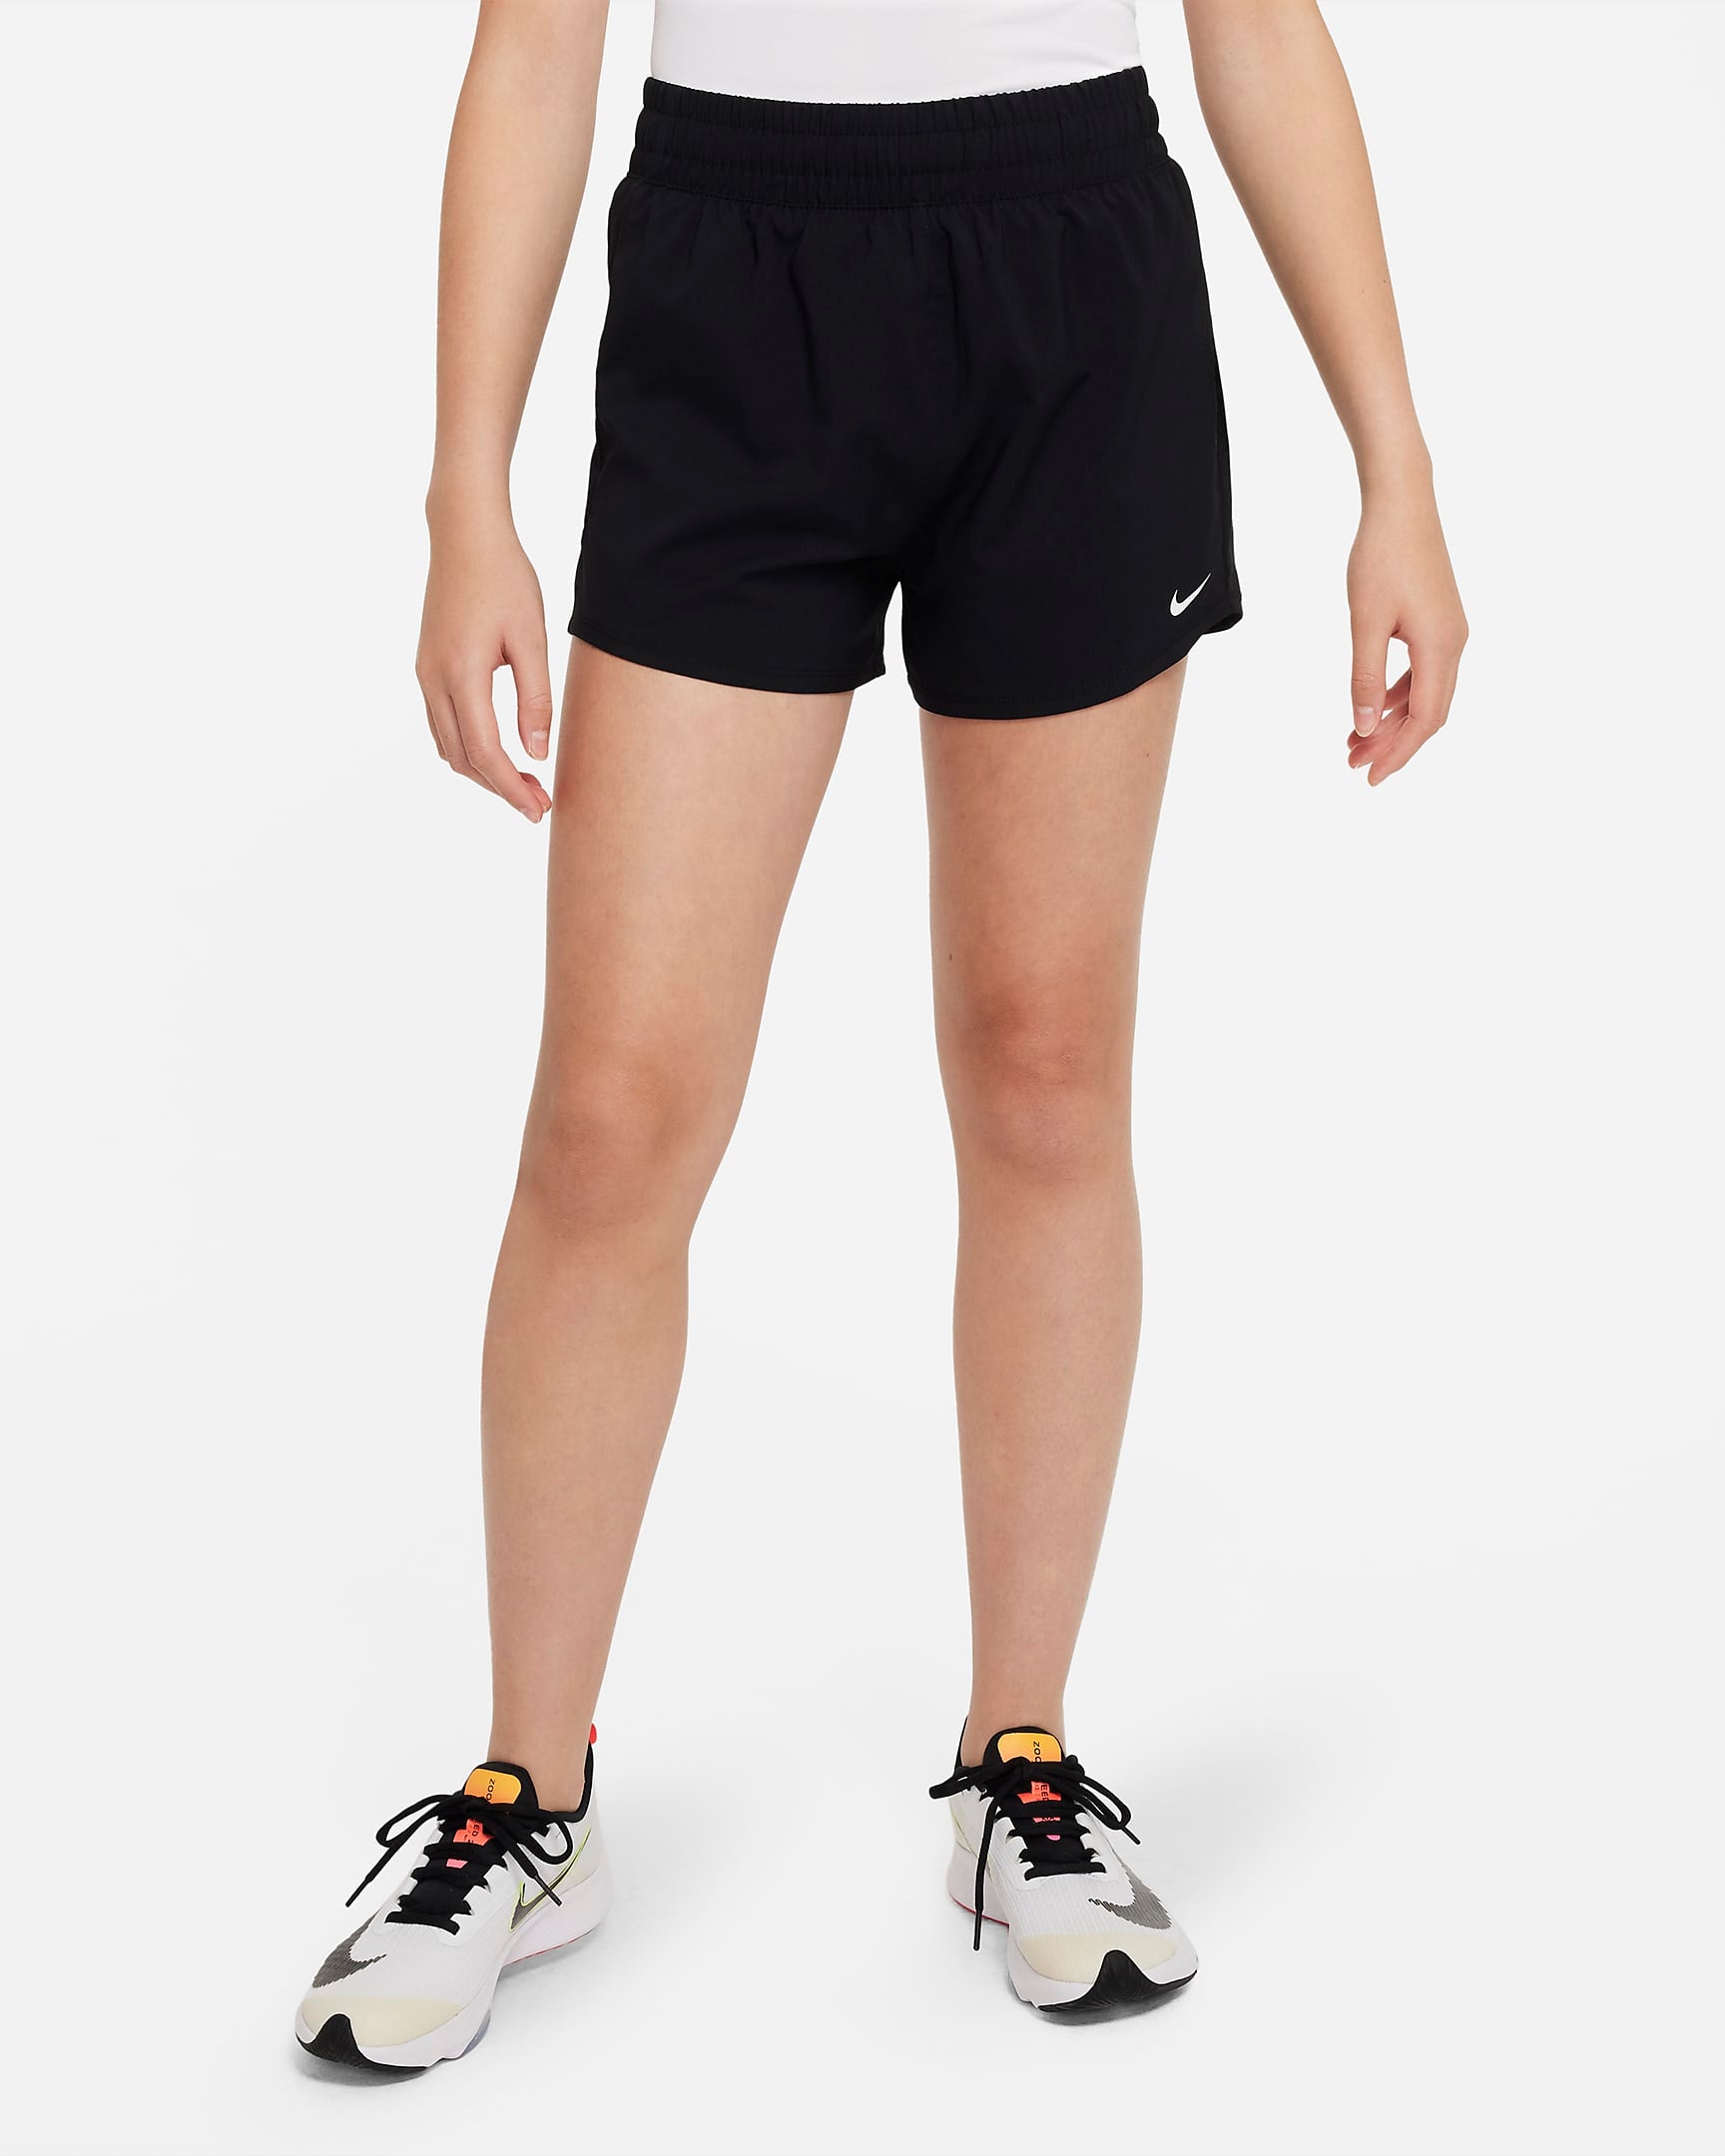 NIKE DRI-FIT HIGH-WAISTED WOVEN SHORTS - DX4967